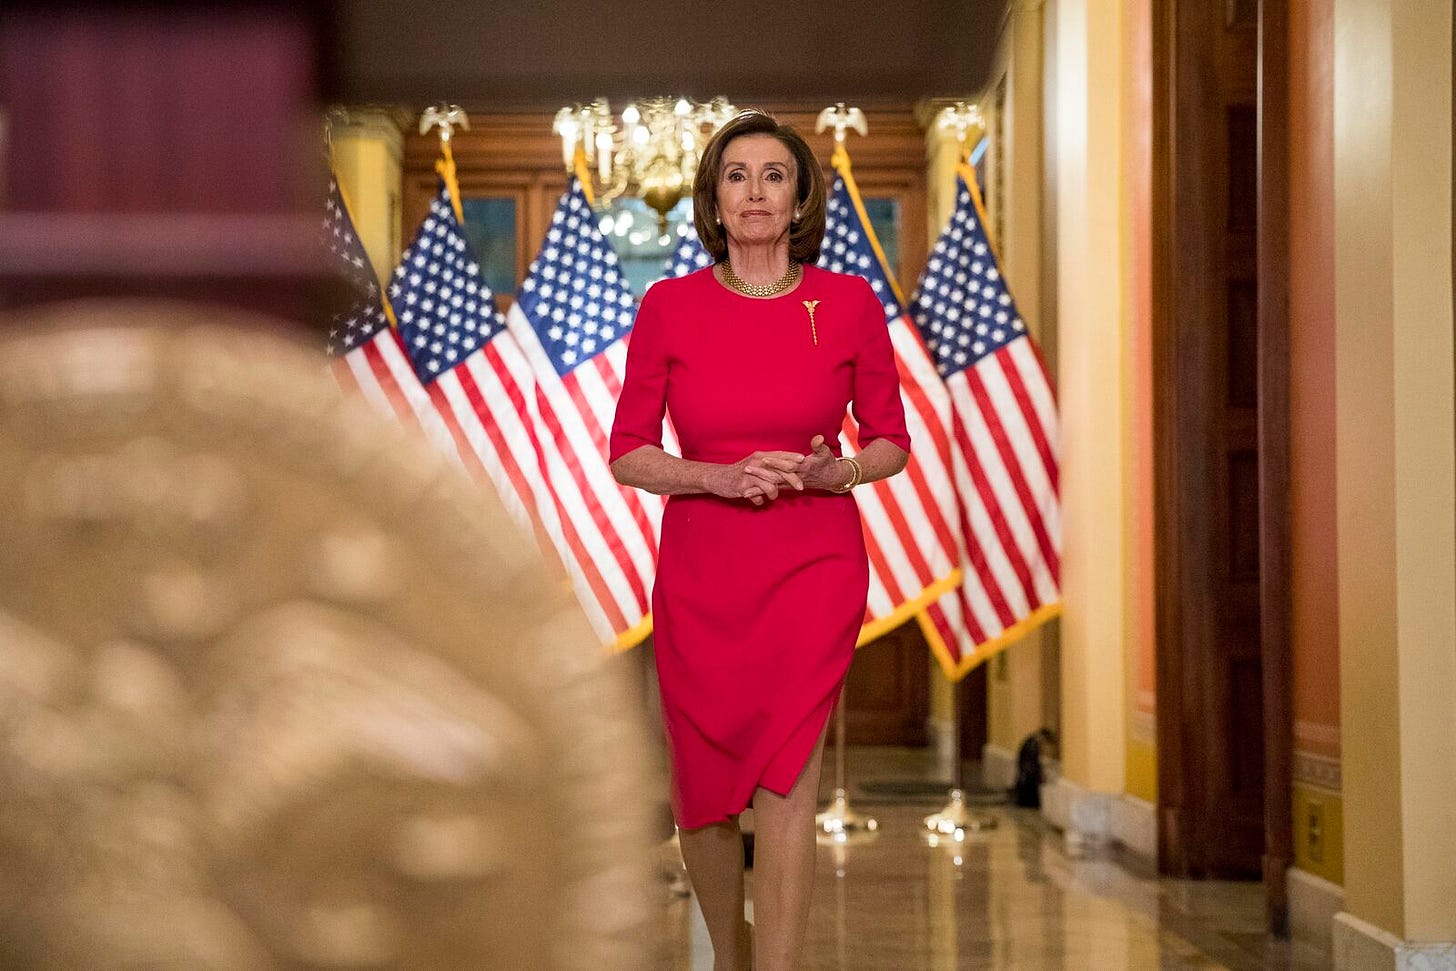 Nancy Pelosi, in a red dress, strides down a hallway in the US Capitol. Behind her, a half-dozen US flags fill the background.